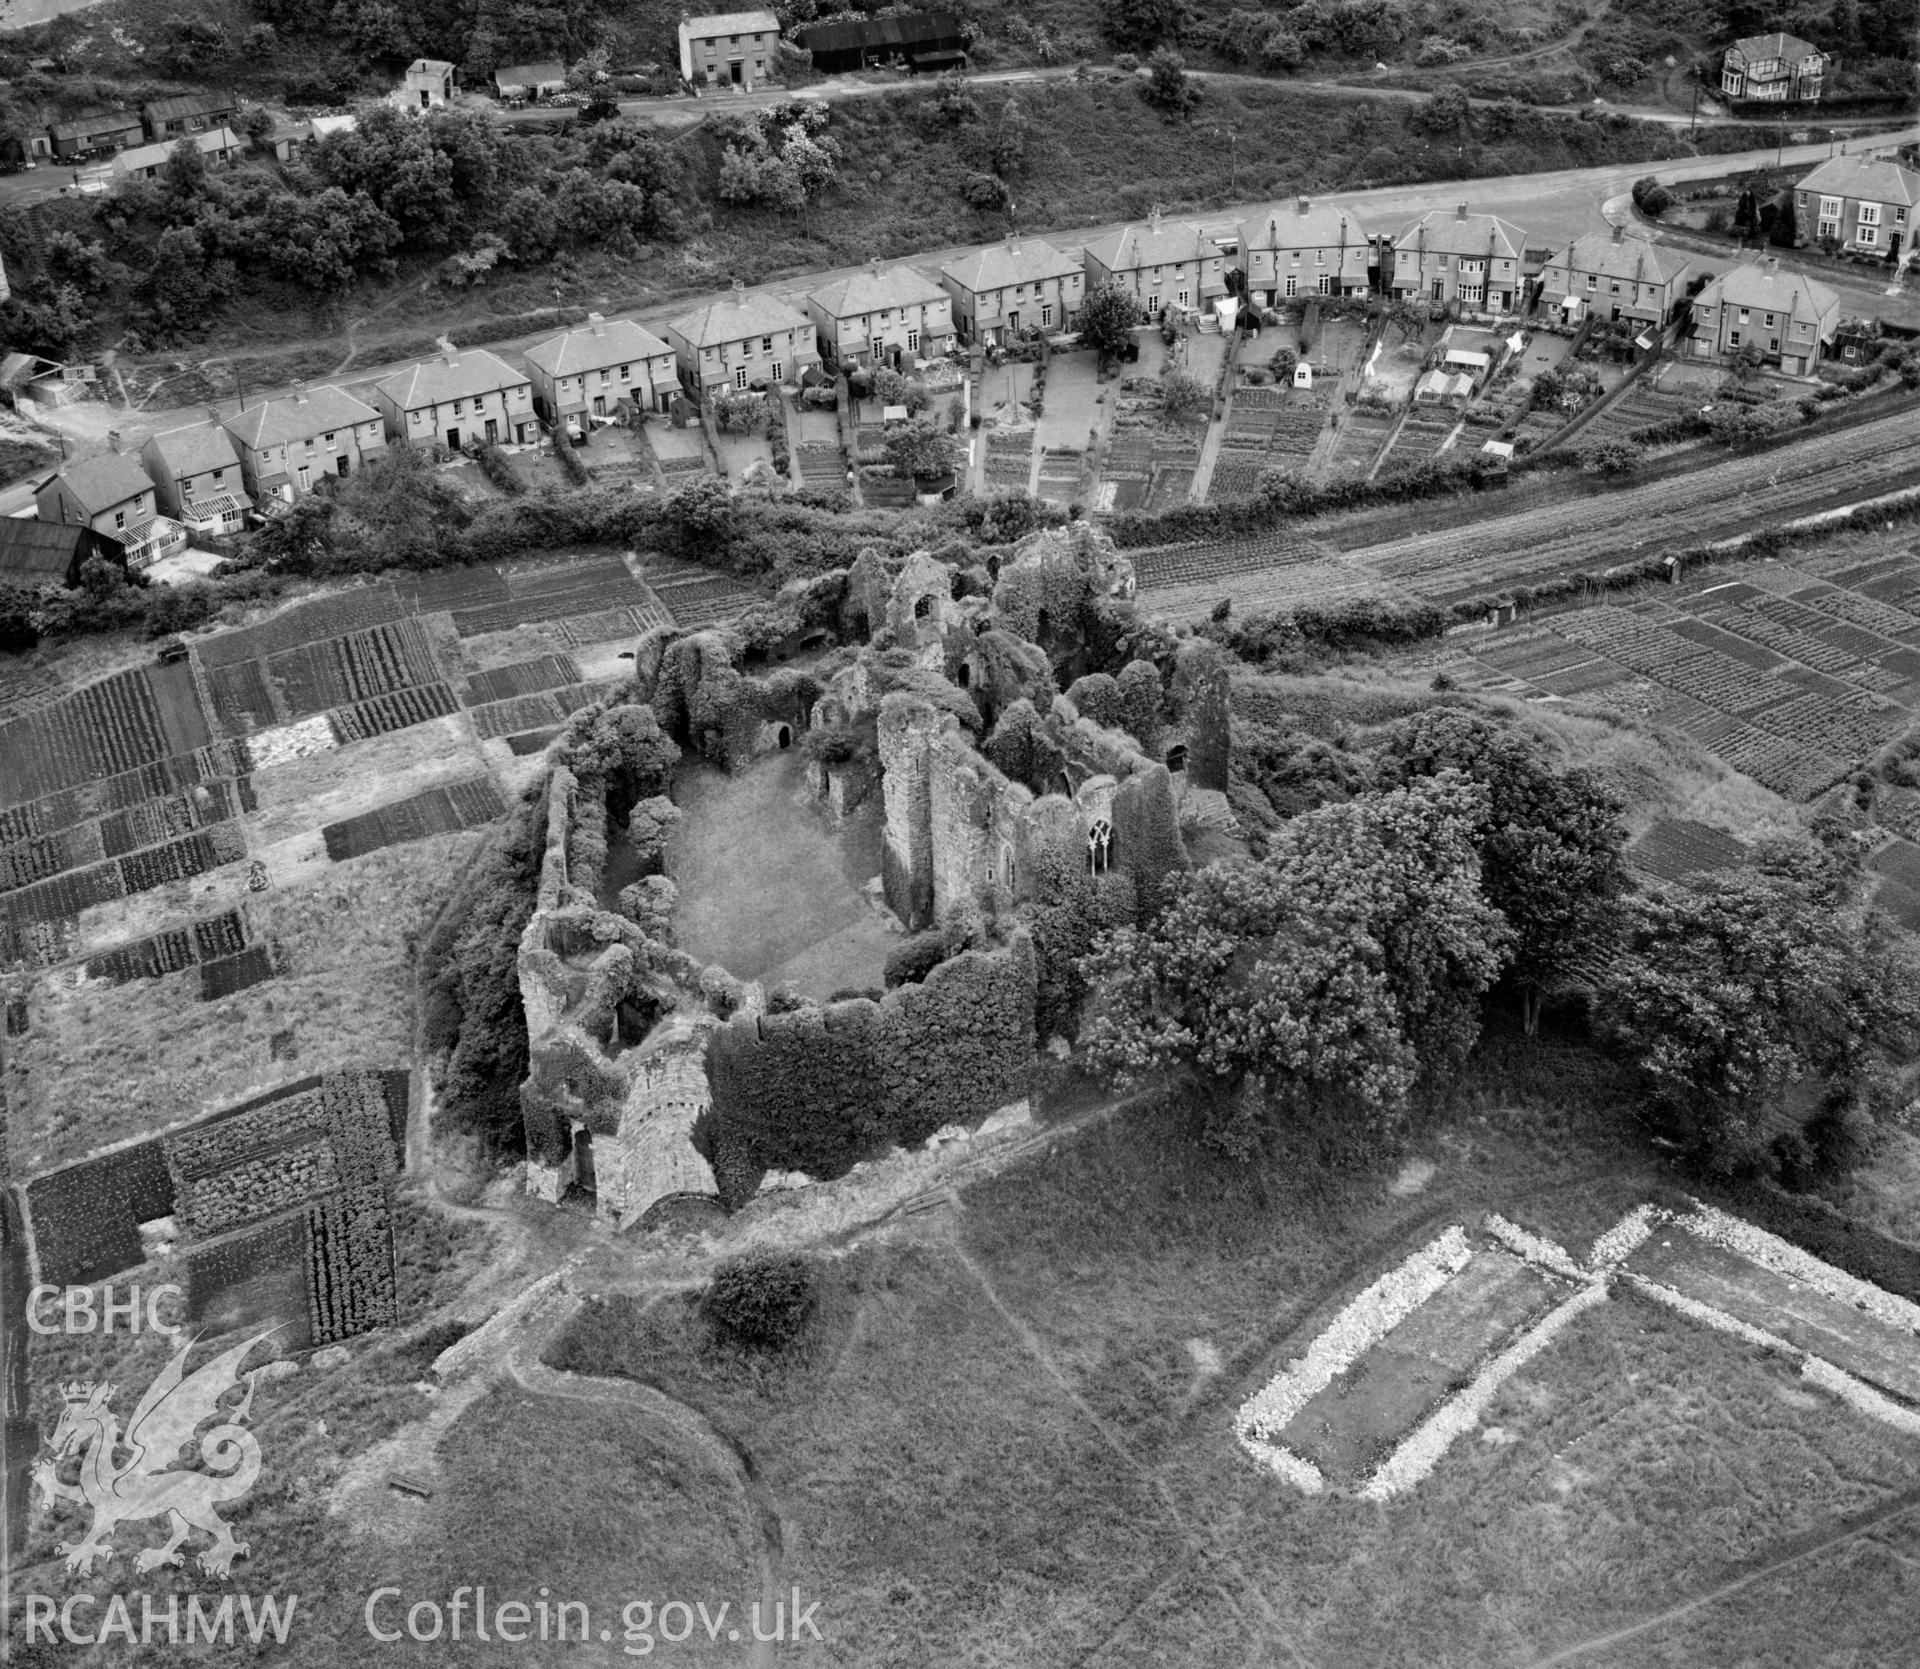 View of Oystermouth castle showing allotment gardens